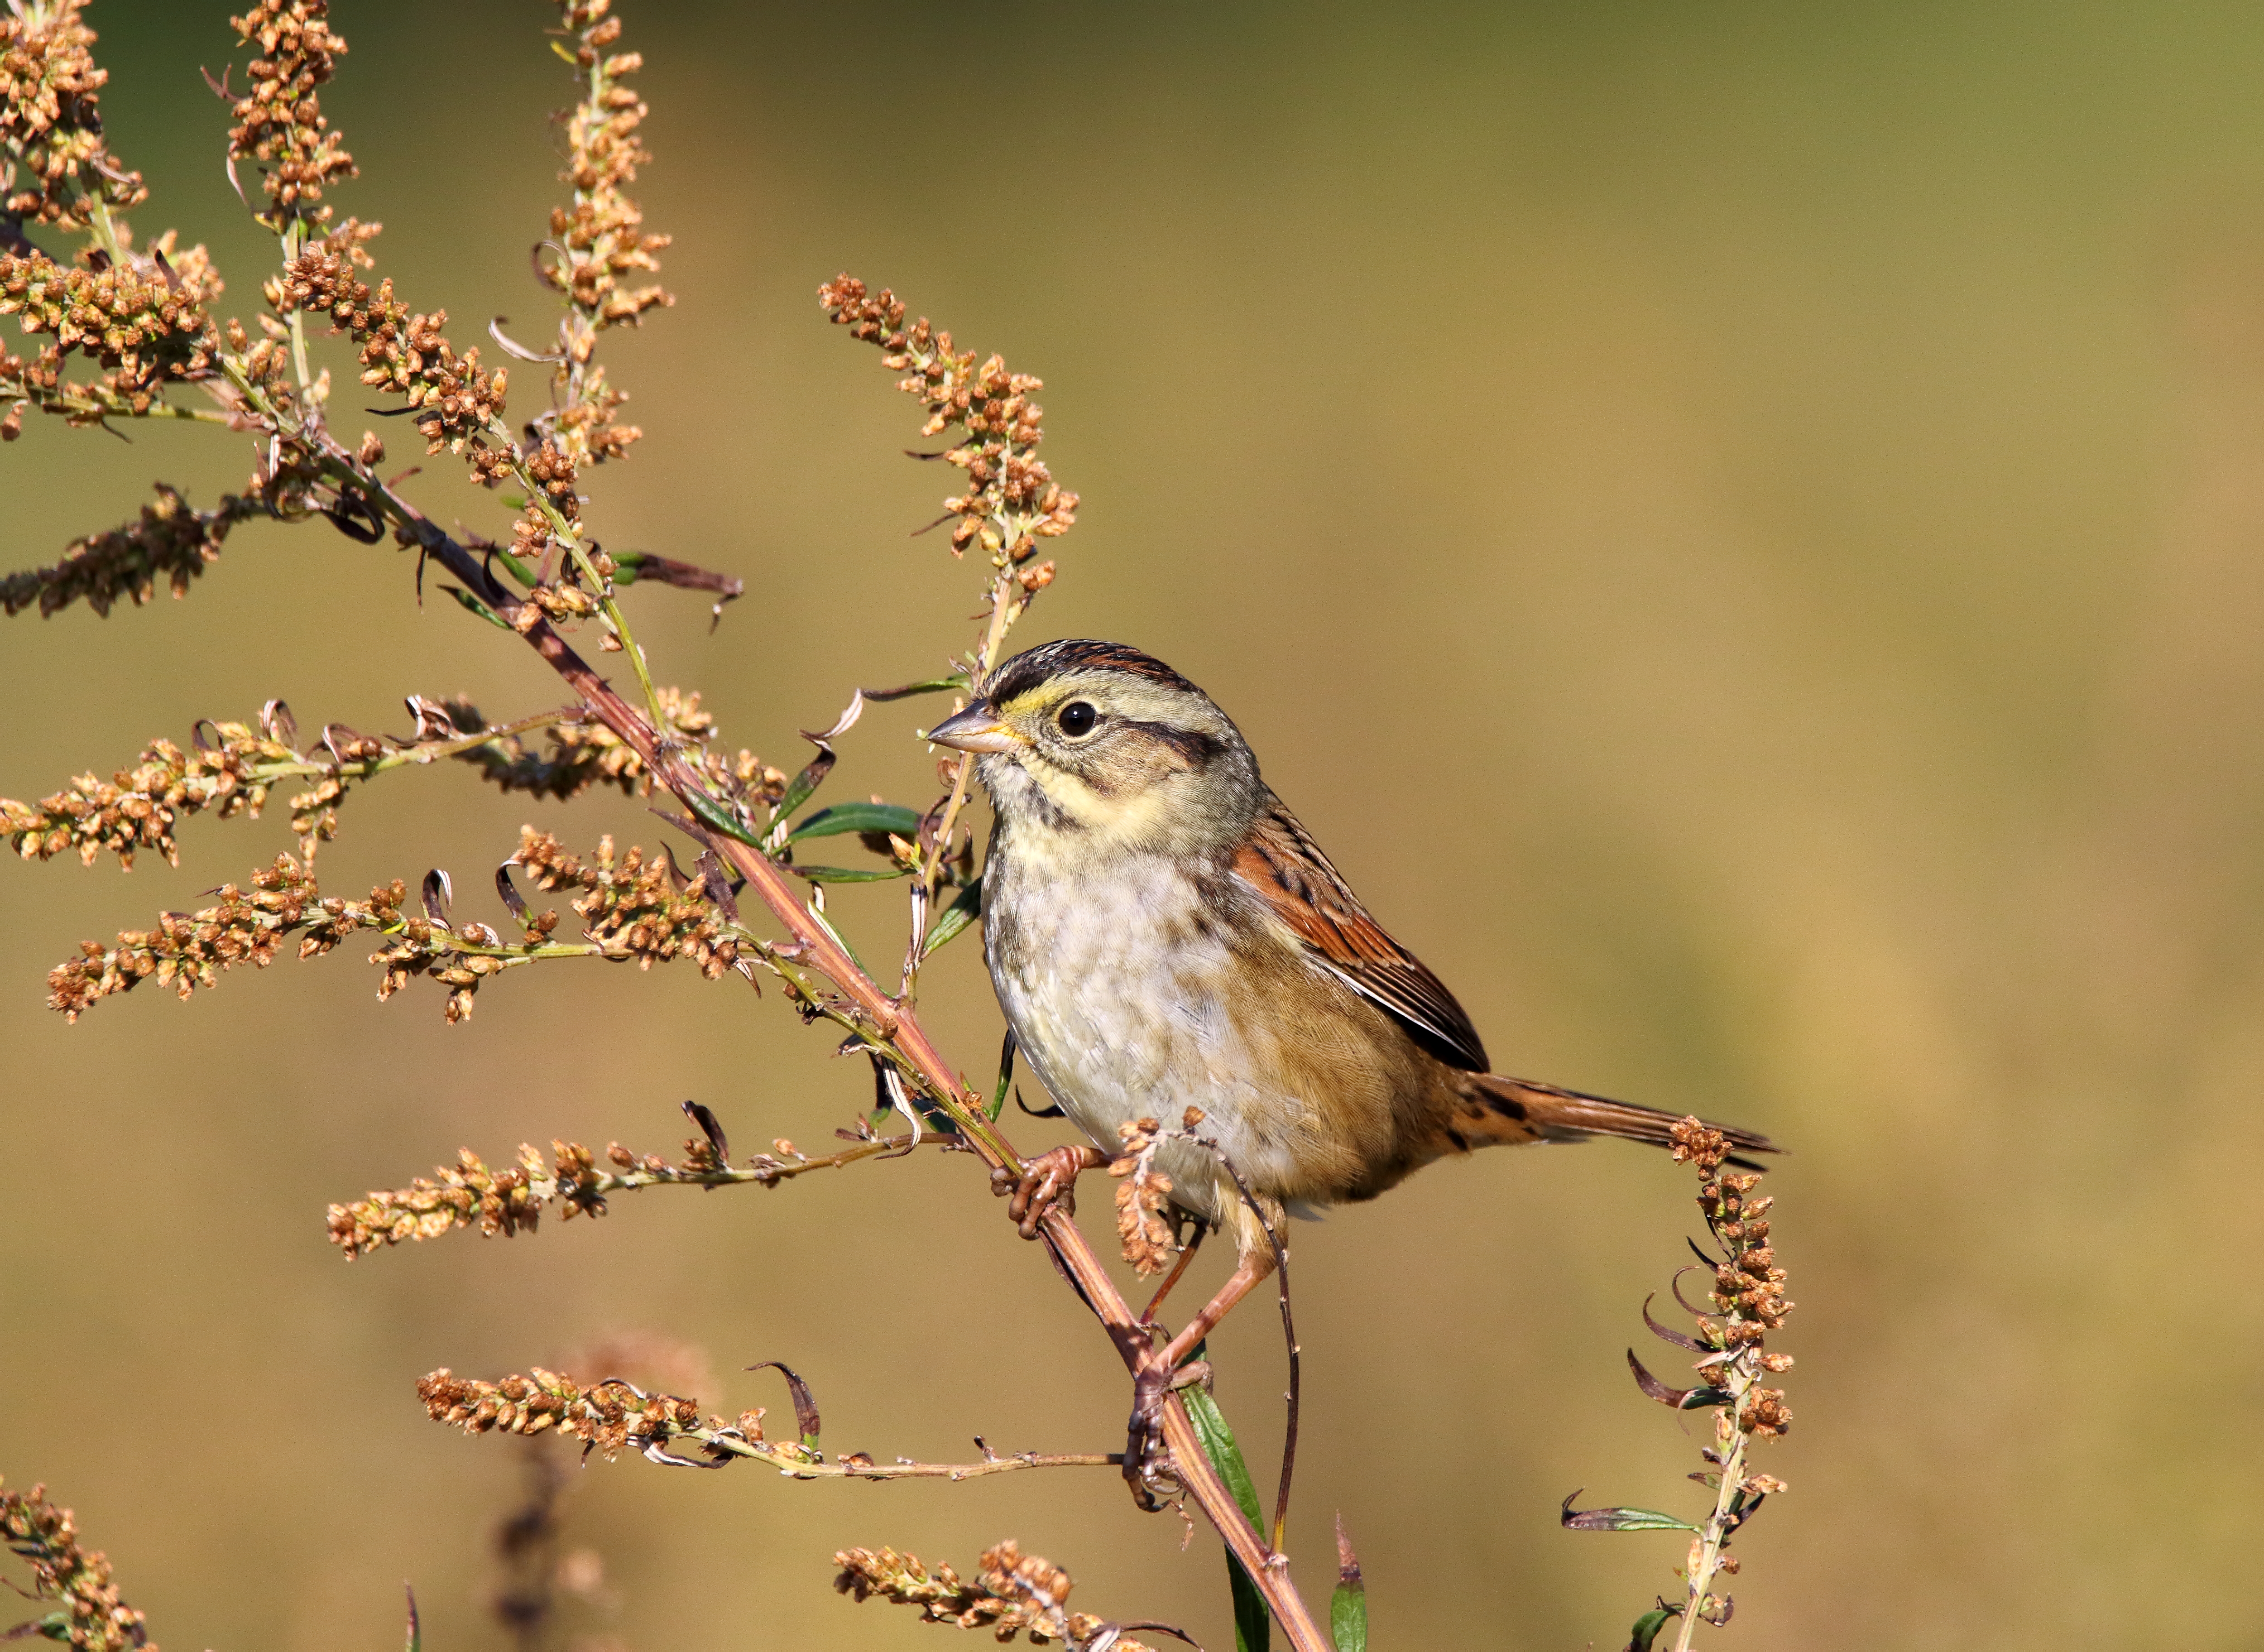 The contrasting warm buff and cool gray of the Swamp Sparrow make it stand out from the sparrow crowd. Photo: <a href=\"https://www.flickr.com/photos/120553232@N02/\" target=\"_blank\" >Isaac Grant</a>